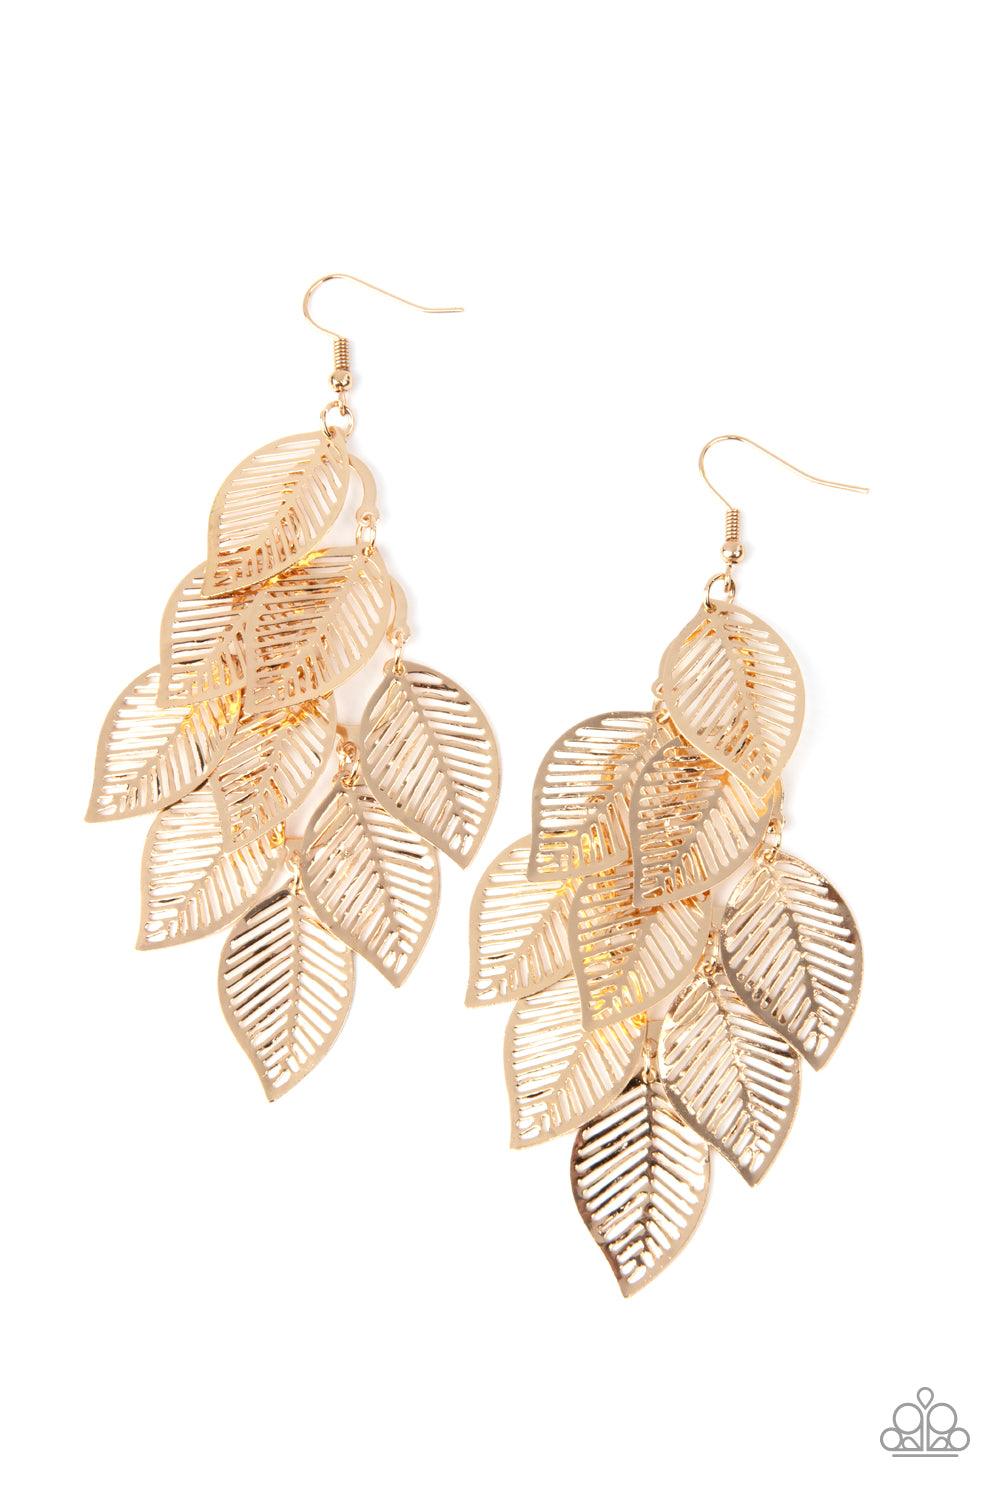 Paparazzi Accessories Limitlessly Leafy - Gold Stenciled gold leaf frames cascade from a gold netted fitting, creating a shimmery leafy fringe. Earring attaches to a standard fishhook fitting. Sold as one pair of earrings. Jewelry